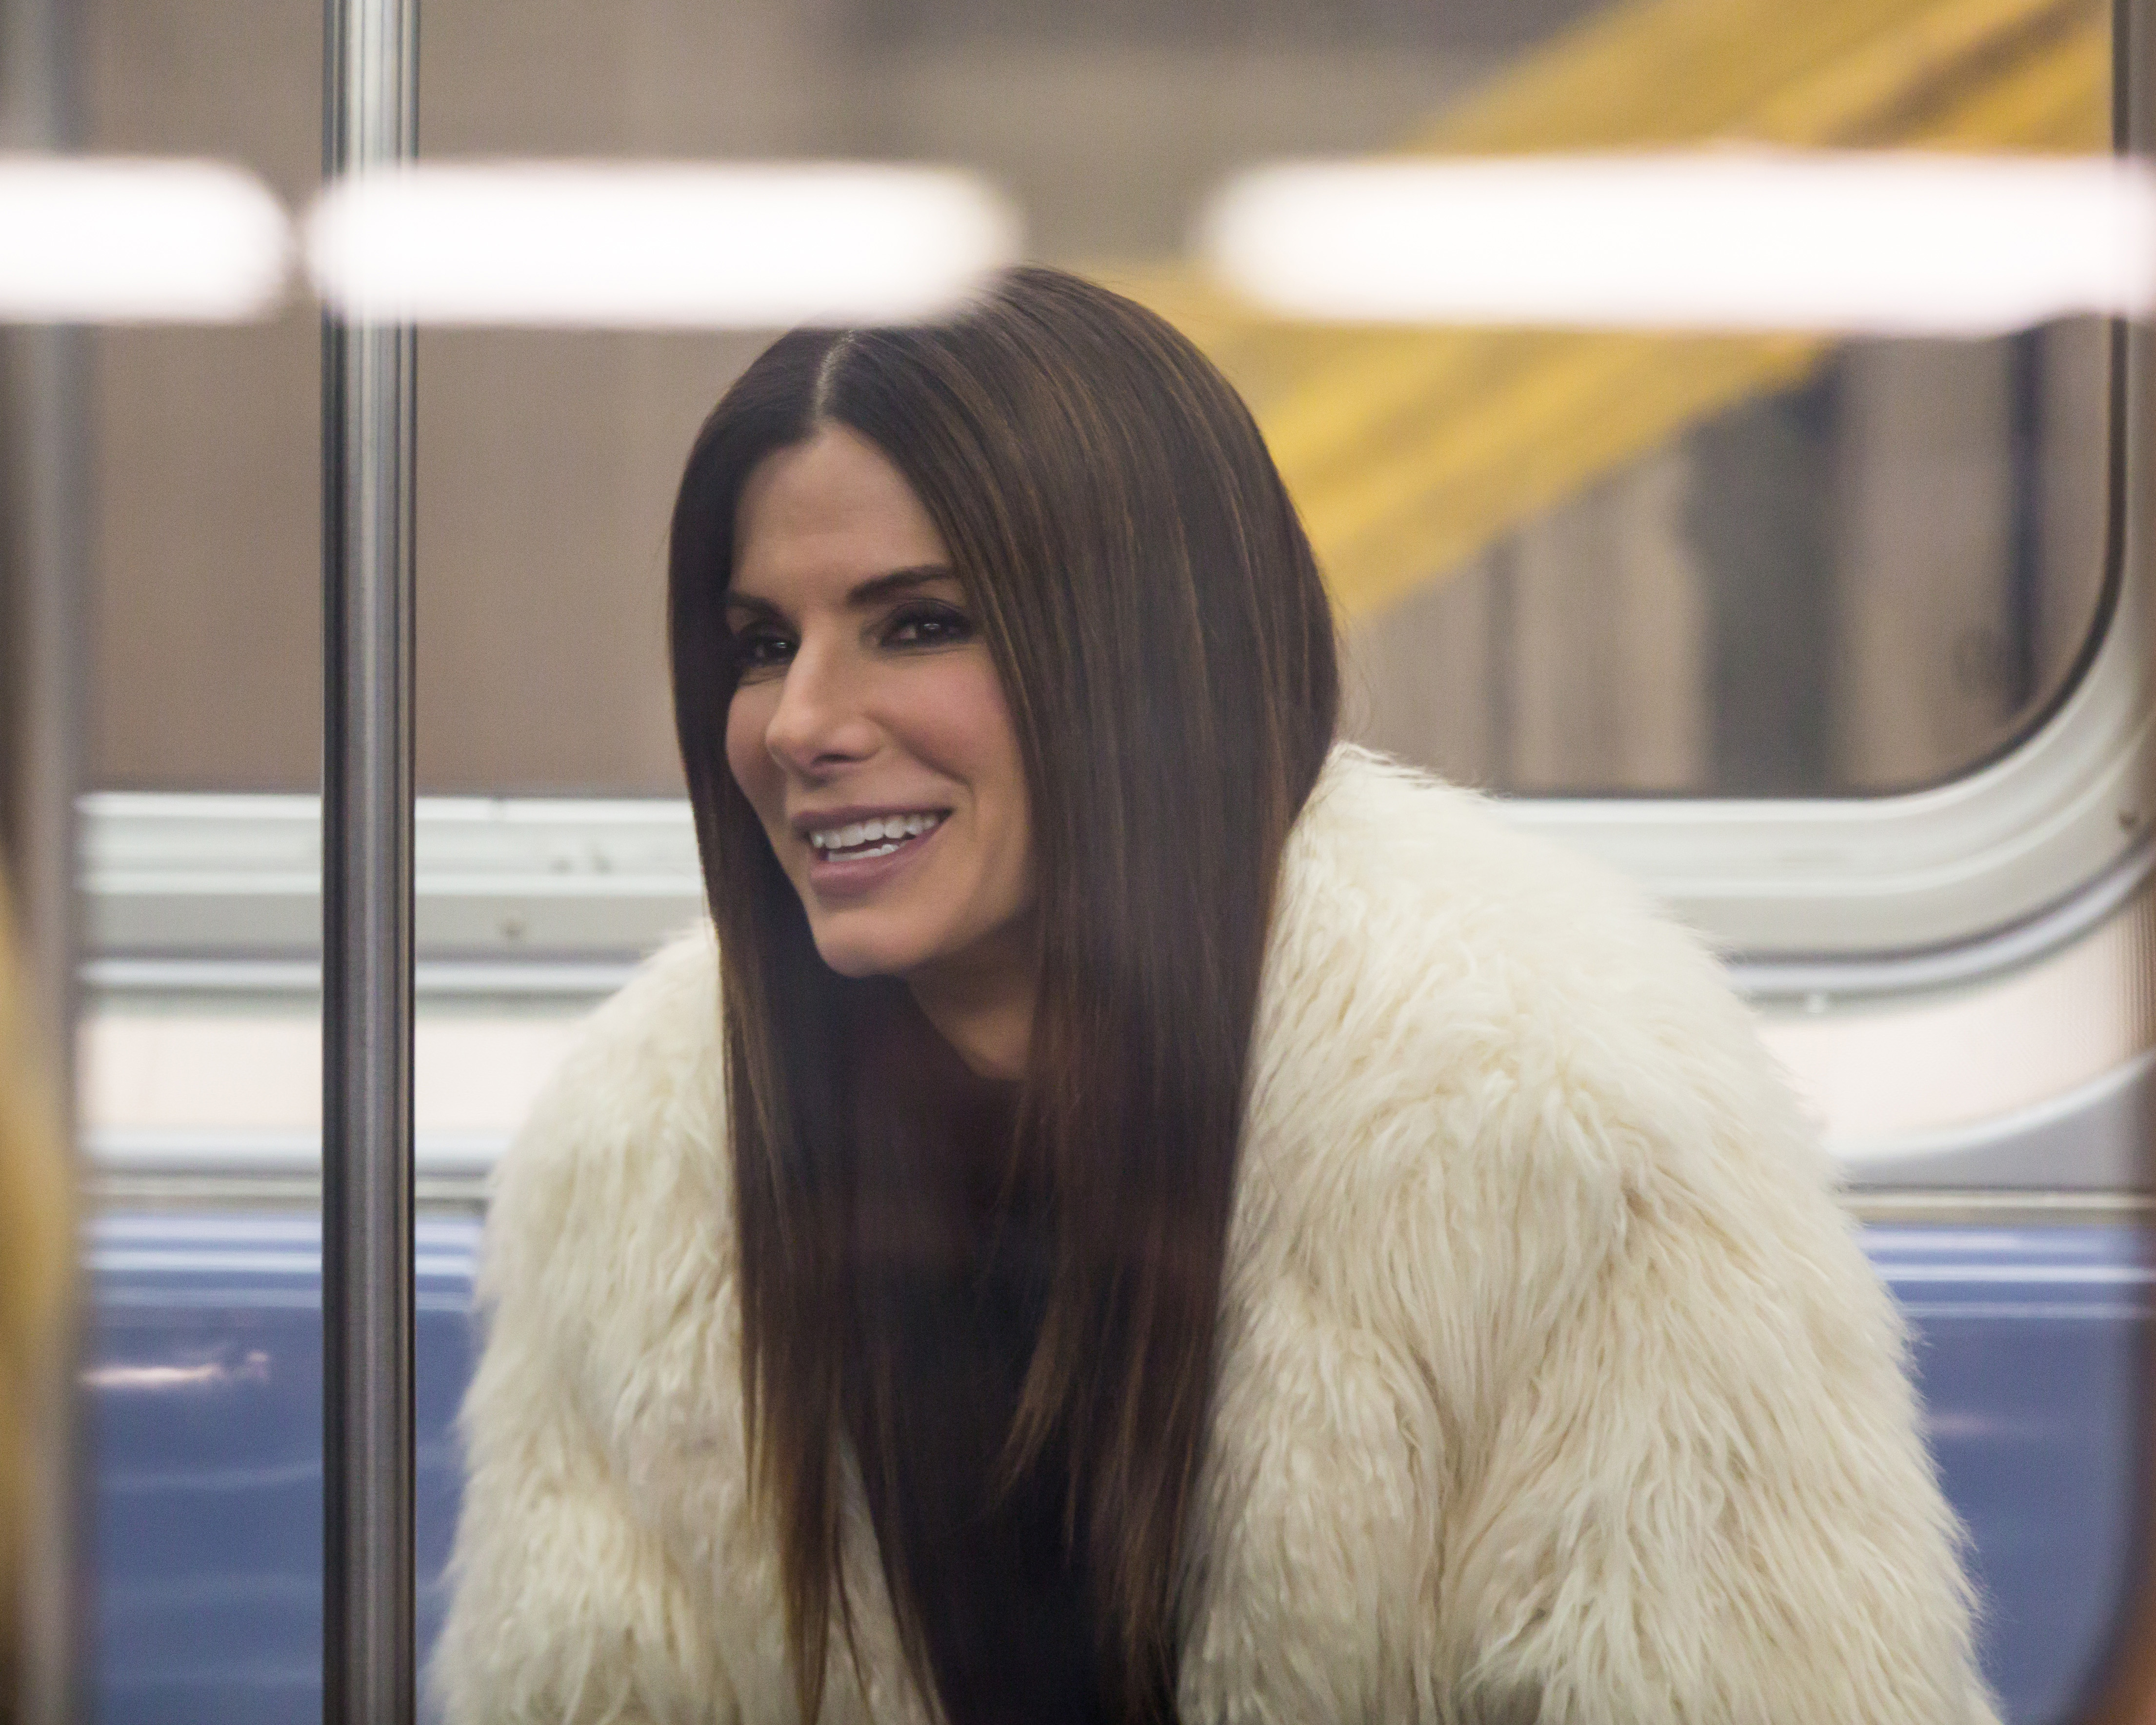 Sandra Bullock during the filming "Ocean's 8" on December 3, 2016 in New York City | Source: Getty Images